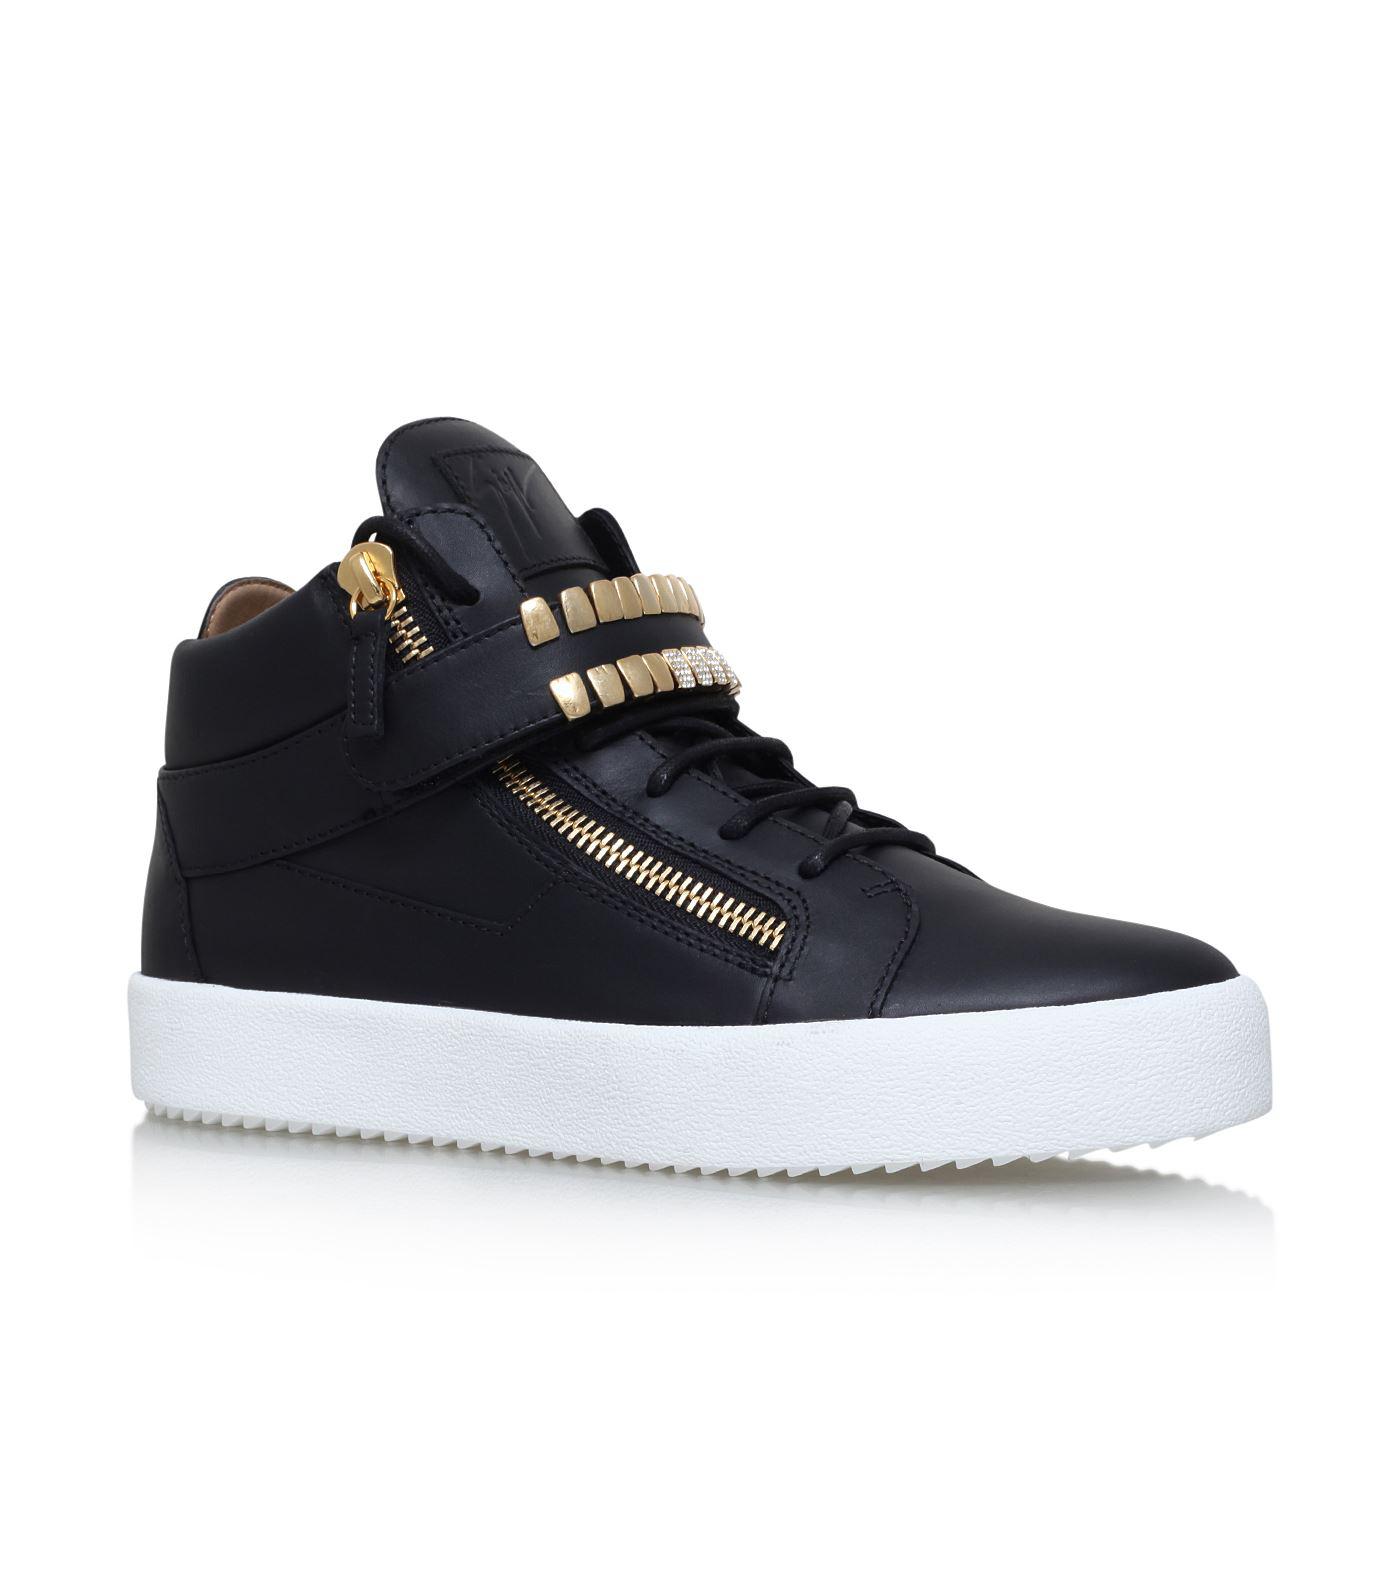 Giuseppe Zanotti Leather Gold Teeth High-top Sneakers in Black for Men -  Lyst